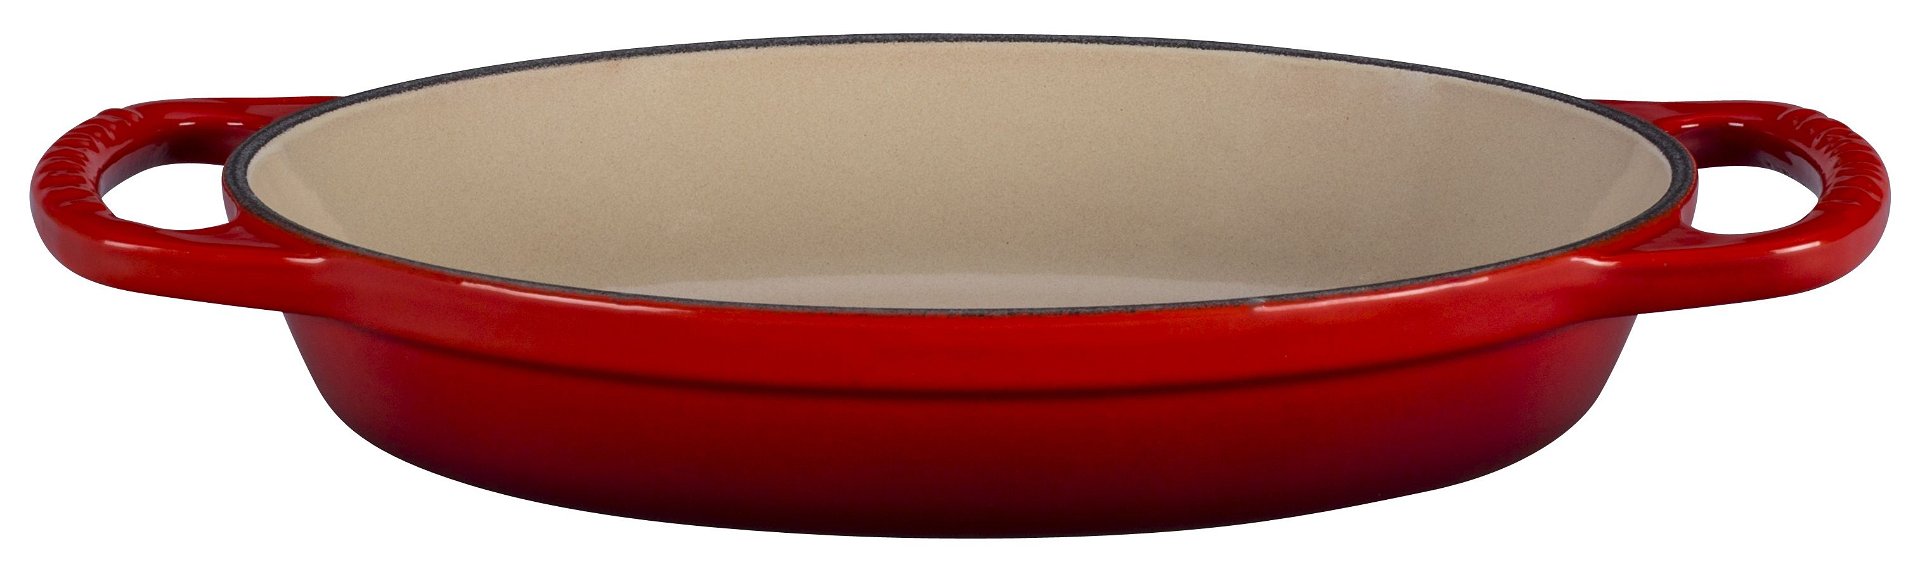 biologie Over het algemeen Trouwens Cerise/Cherry Red 5/8 Qt Signature 8” Cast Iron Oval Baker | Le Creuset |  Everything Kitchens